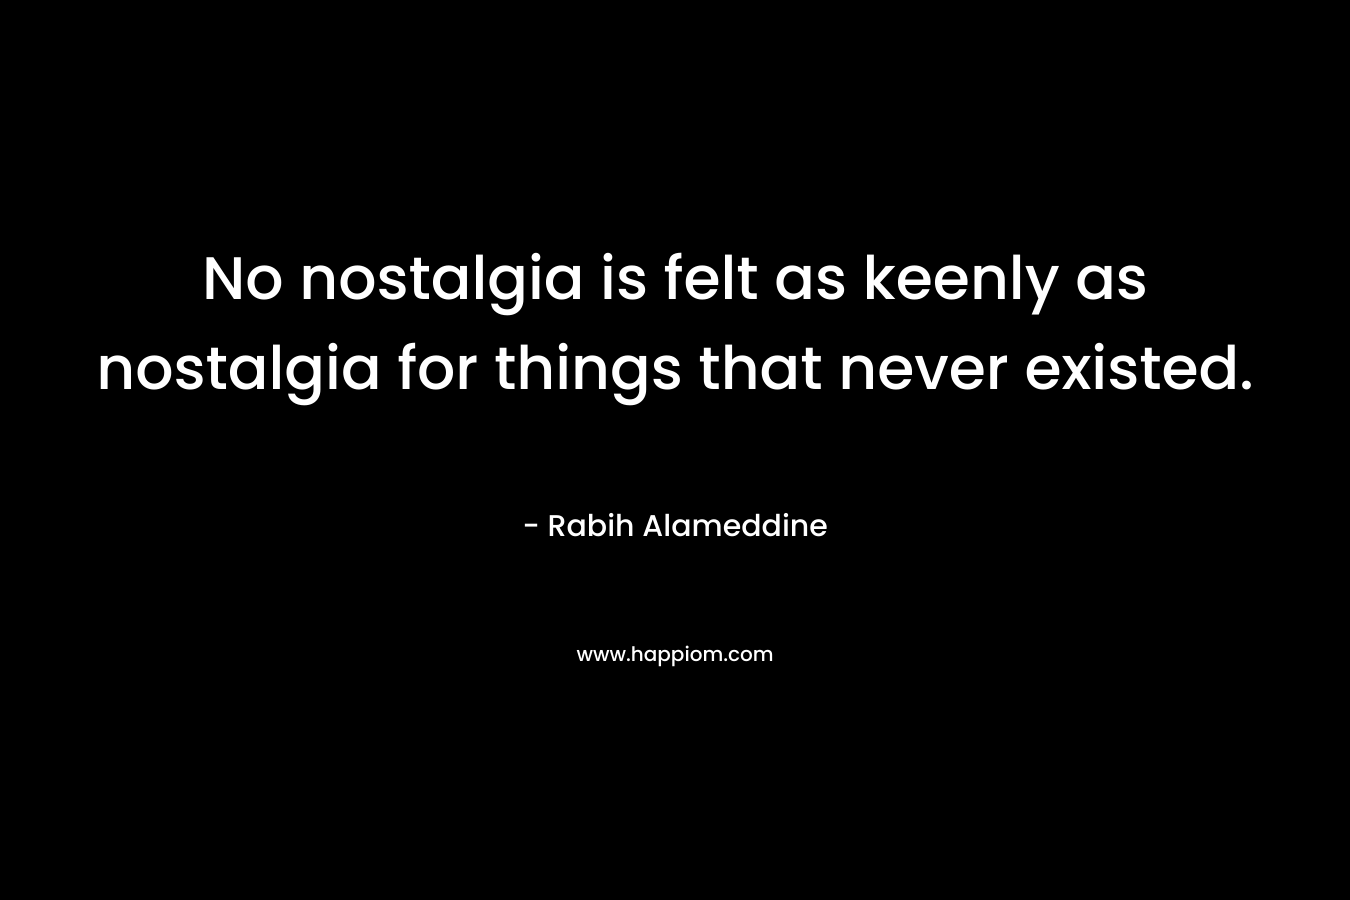 No nostalgia is felt as keenly as nostalgia for things that never existed.